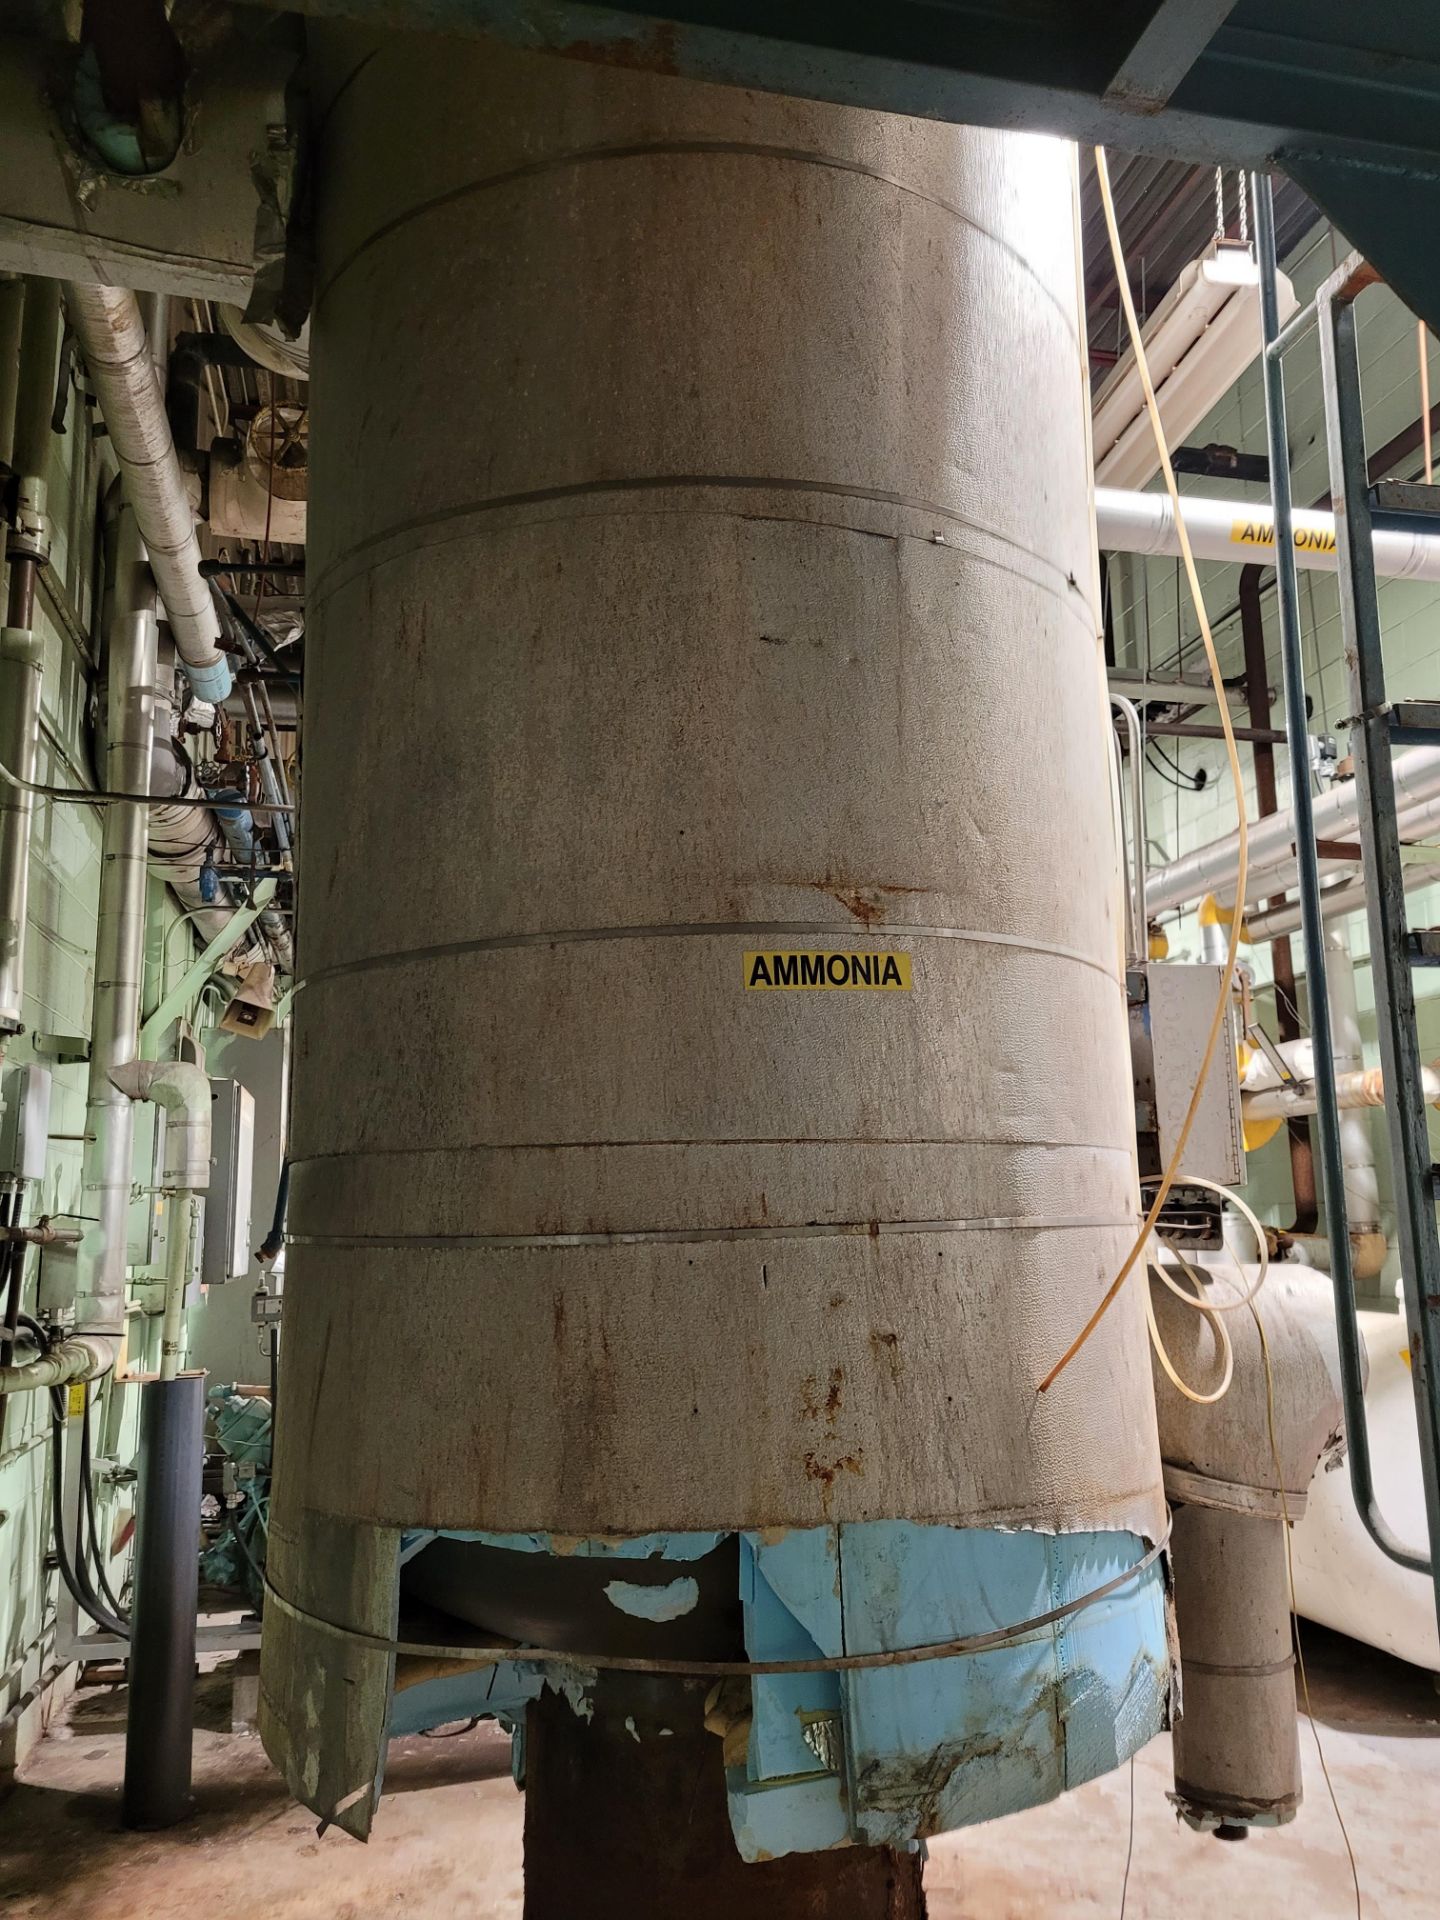 Vertical ammonia receiver, 10' long x 4" dia., insulated with ammonia drum - Image 7 of 7